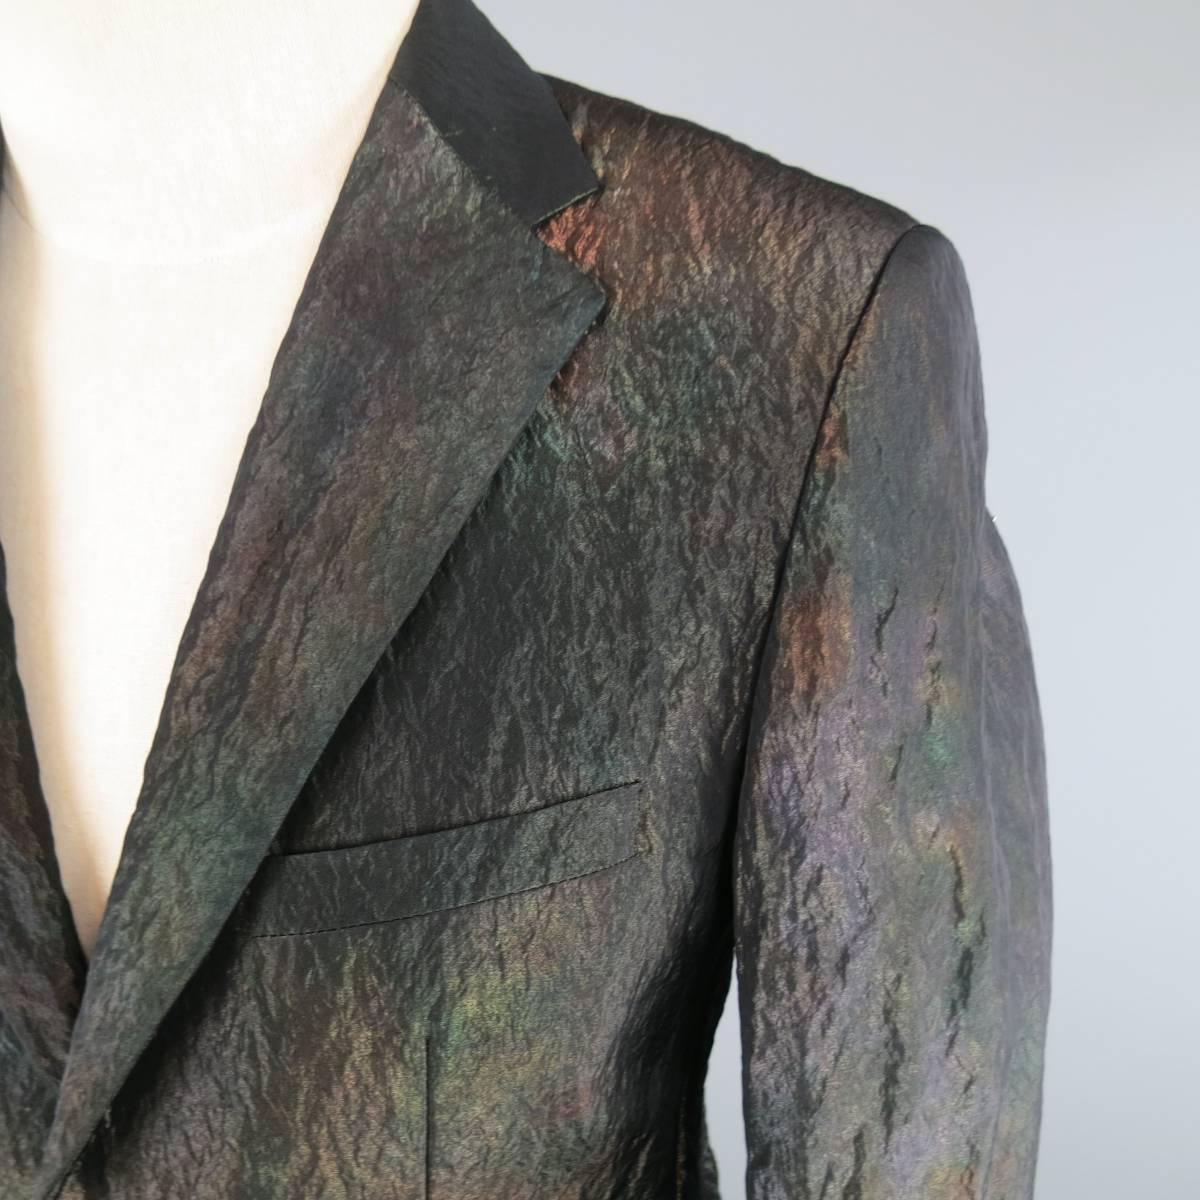 JIL SANDER sport coat in a unique wrinkle textured metallic deep green fabric with orange tone iridescence with a classic notch lapel and two button closure. Made in Italy.
 
Excellent Pre-Owned Condition.
Marked: IT 40
 
Measurements:
 
Shoulder: